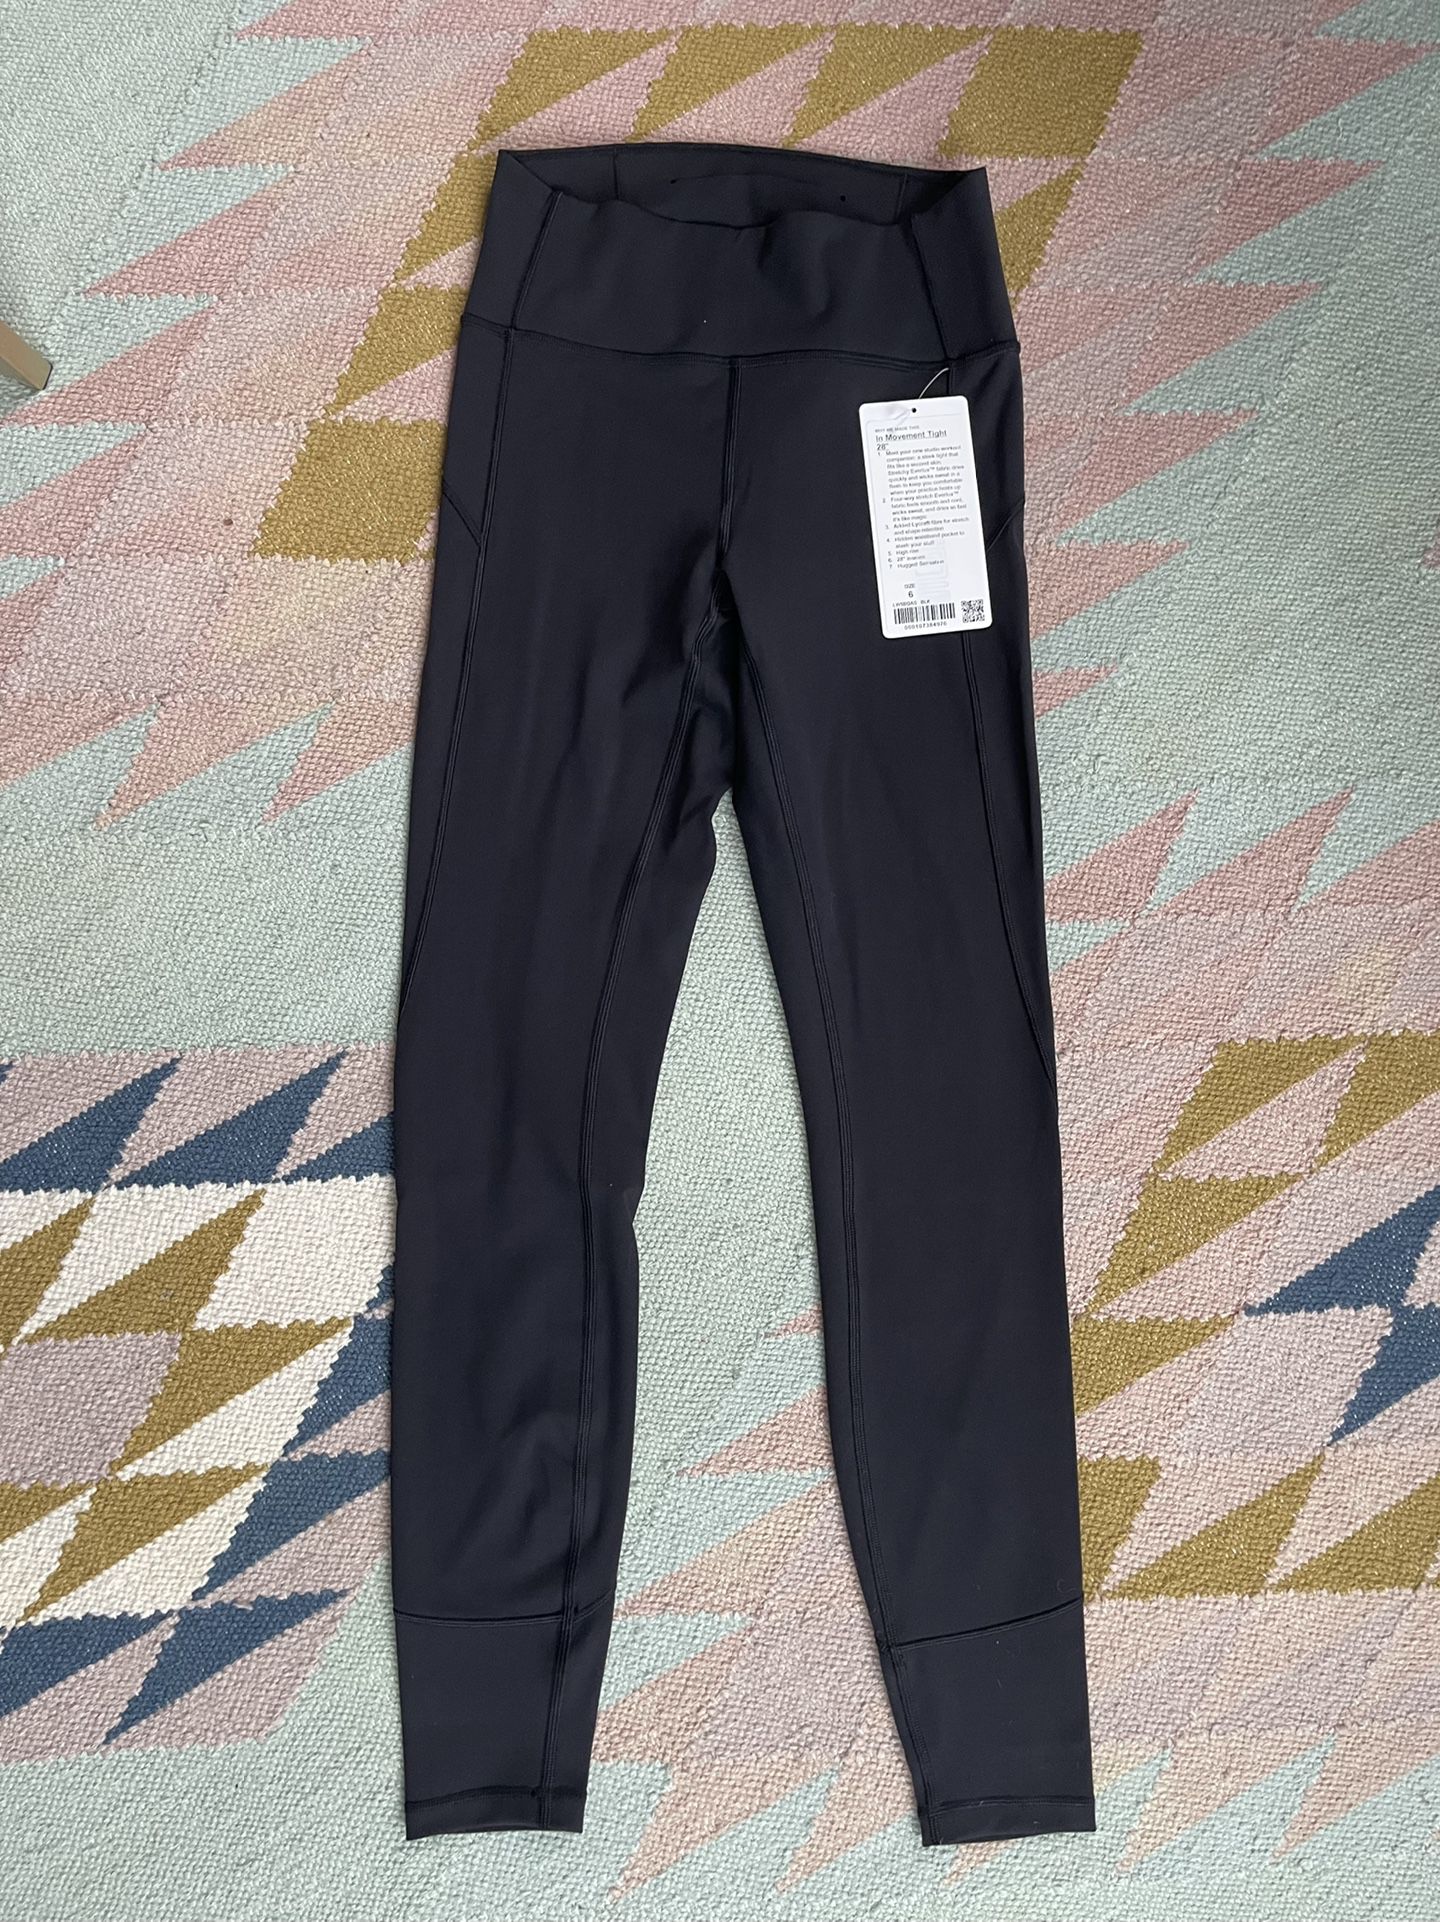 NWT Lululemon In Movement Tight 28"  Everlux Size 6